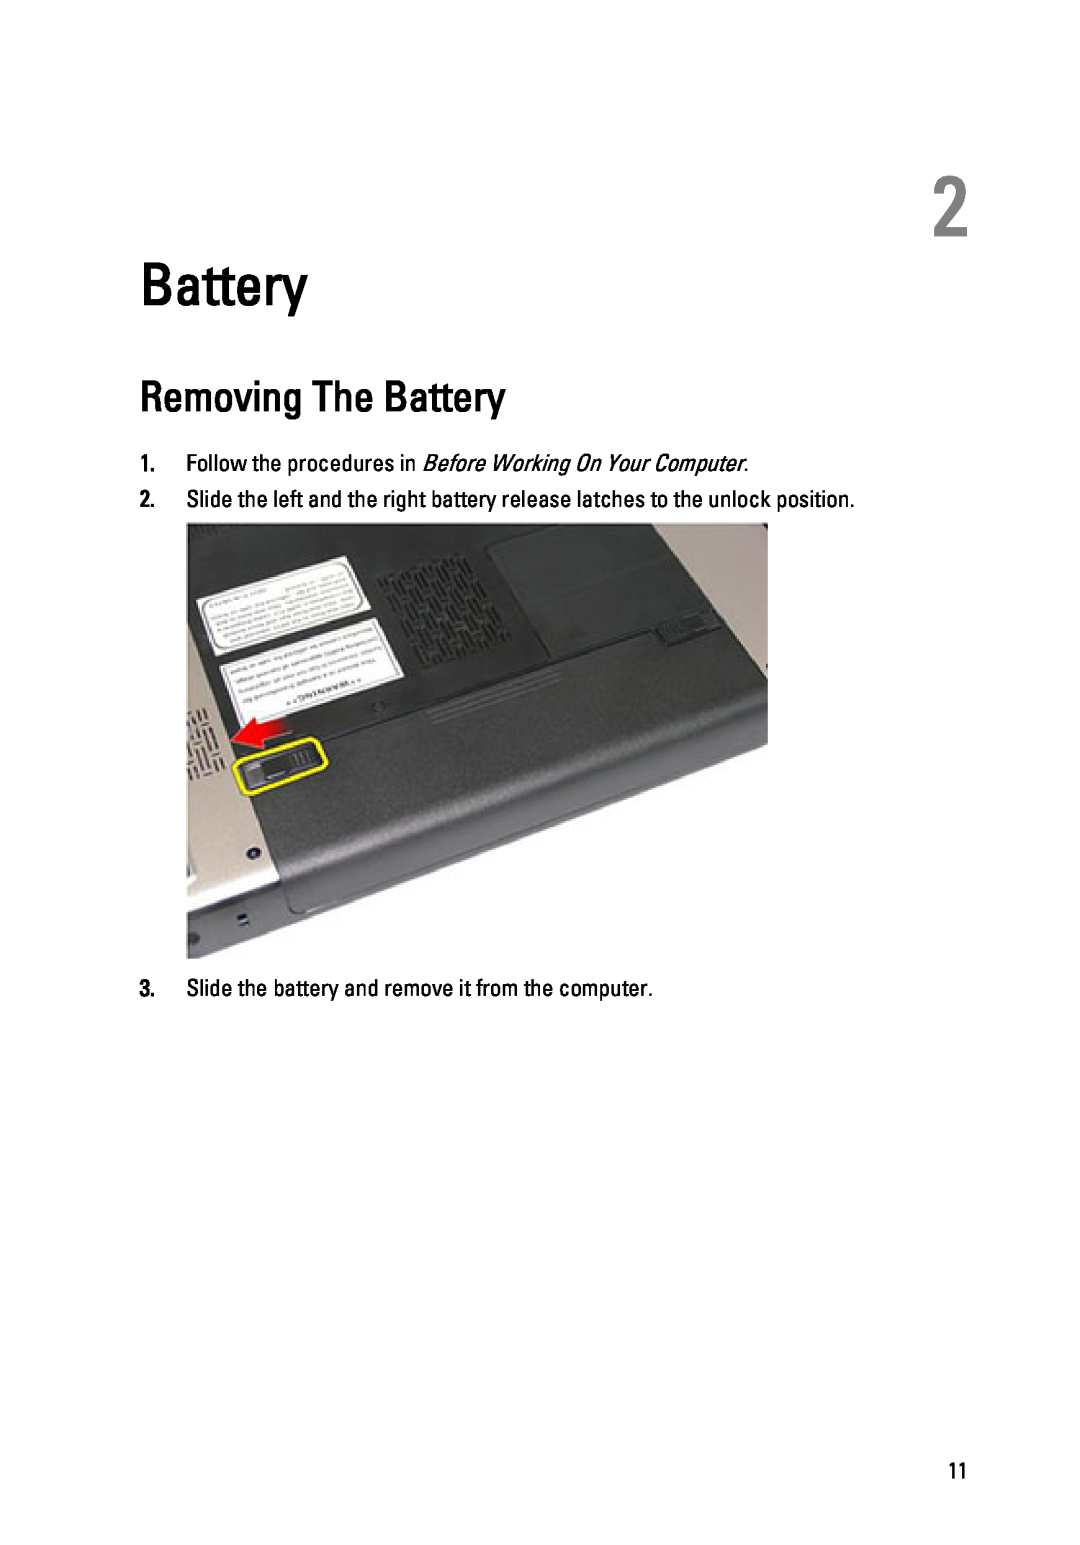 Dell 3450 owner manual Removing The Battery, Follow the procedures in Before Working On Your Computer 